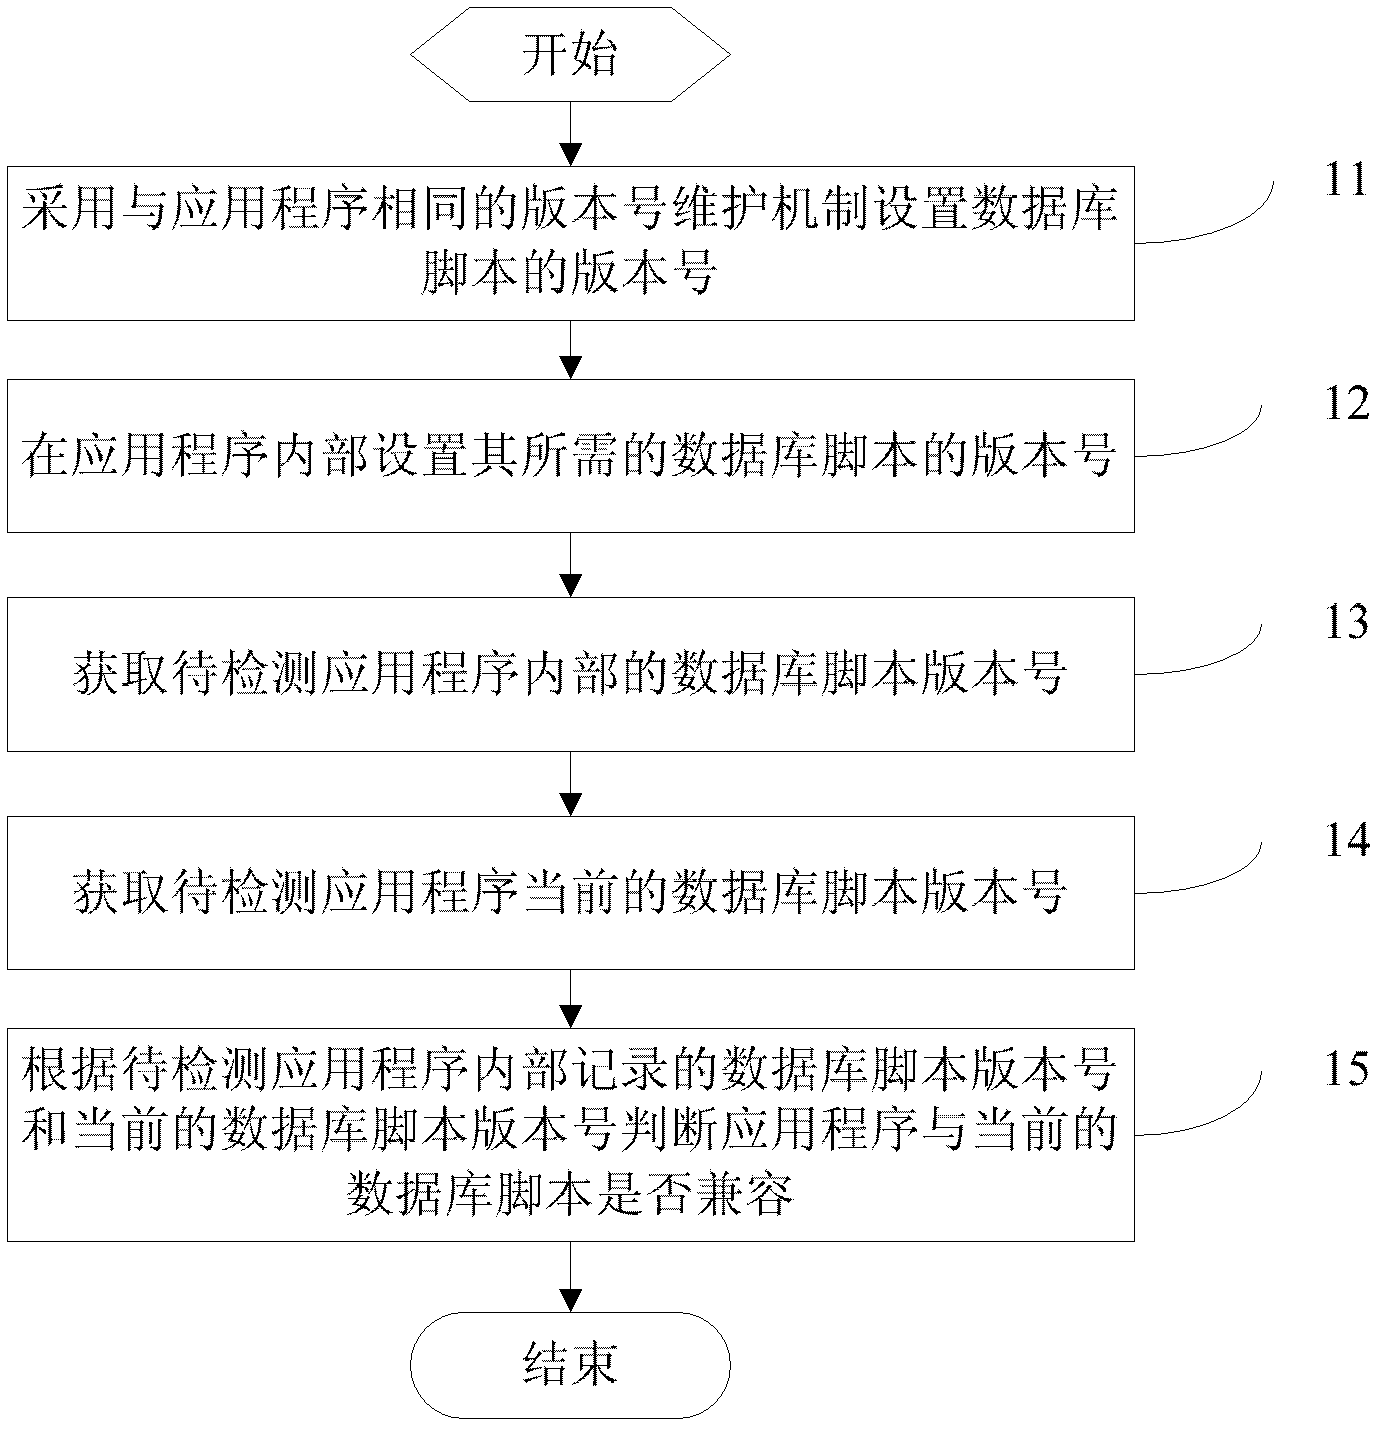 Methods for detecting compatibility of application program and relevant database script and performing upgrading maintenance on application program and relevant database script